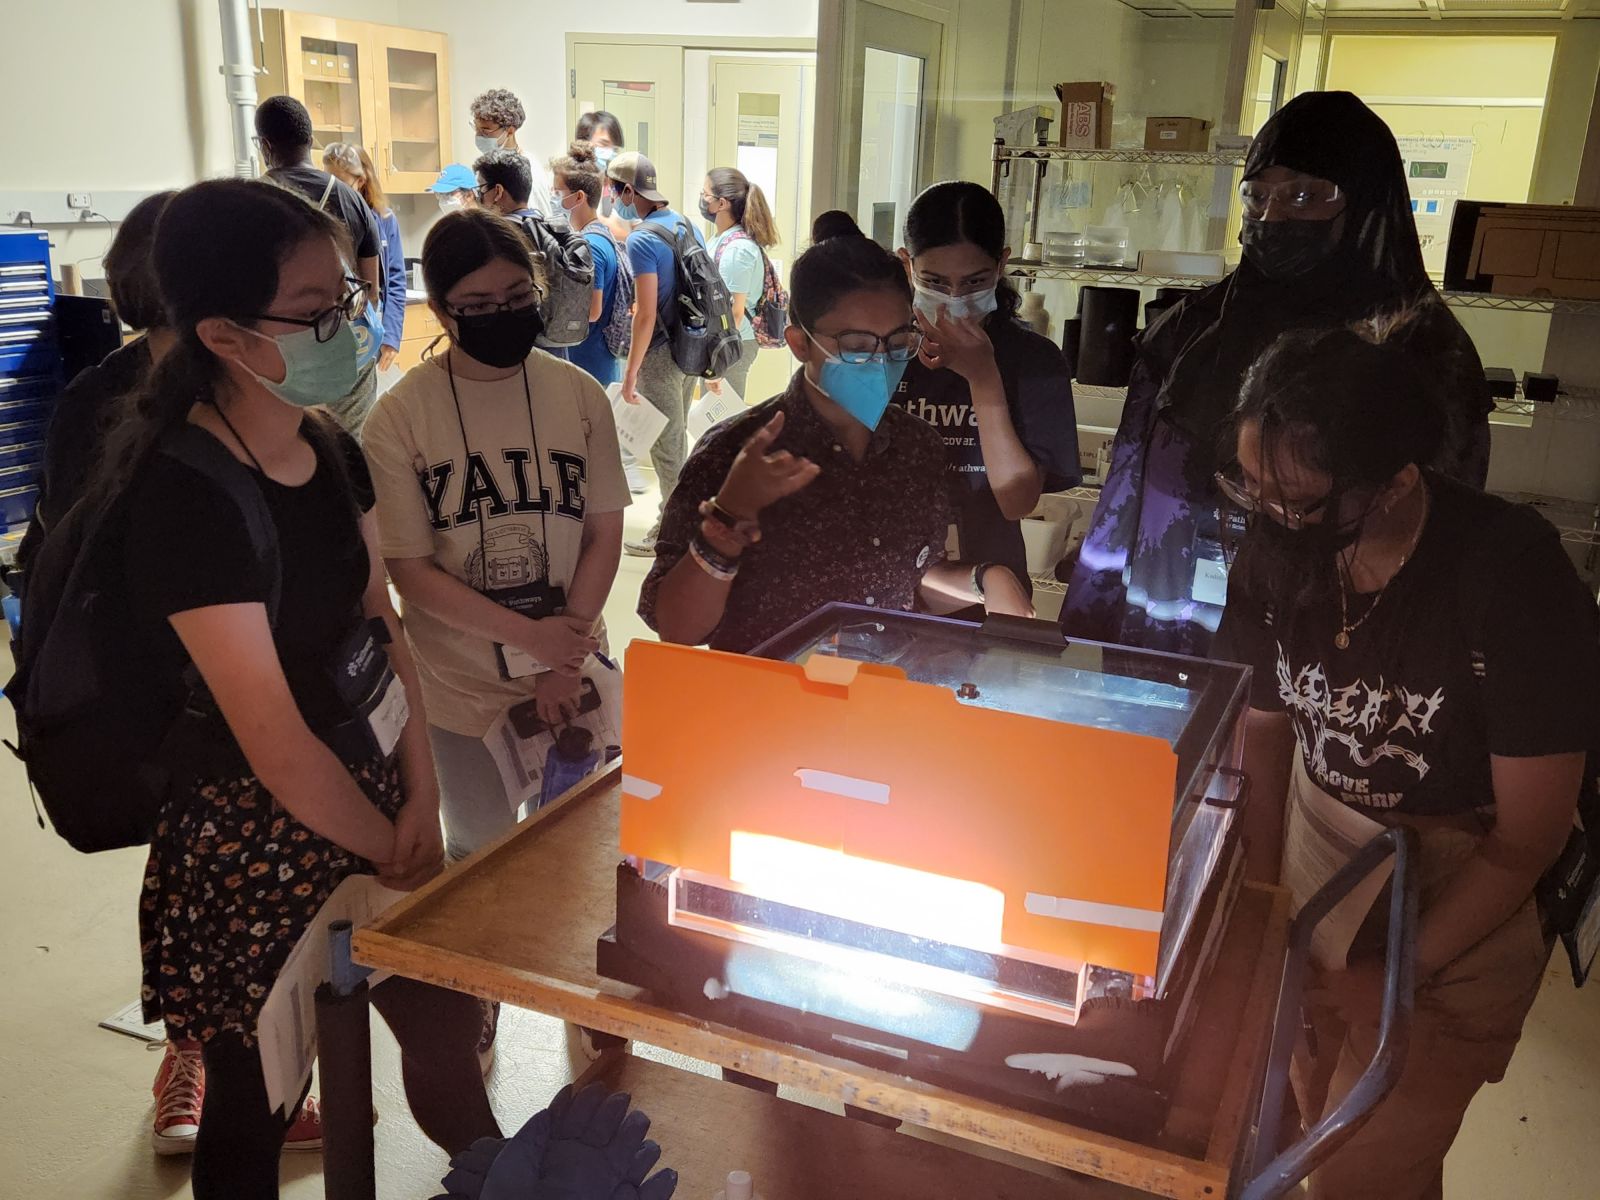 a group of people standing around a table with a cloud chamber on it.